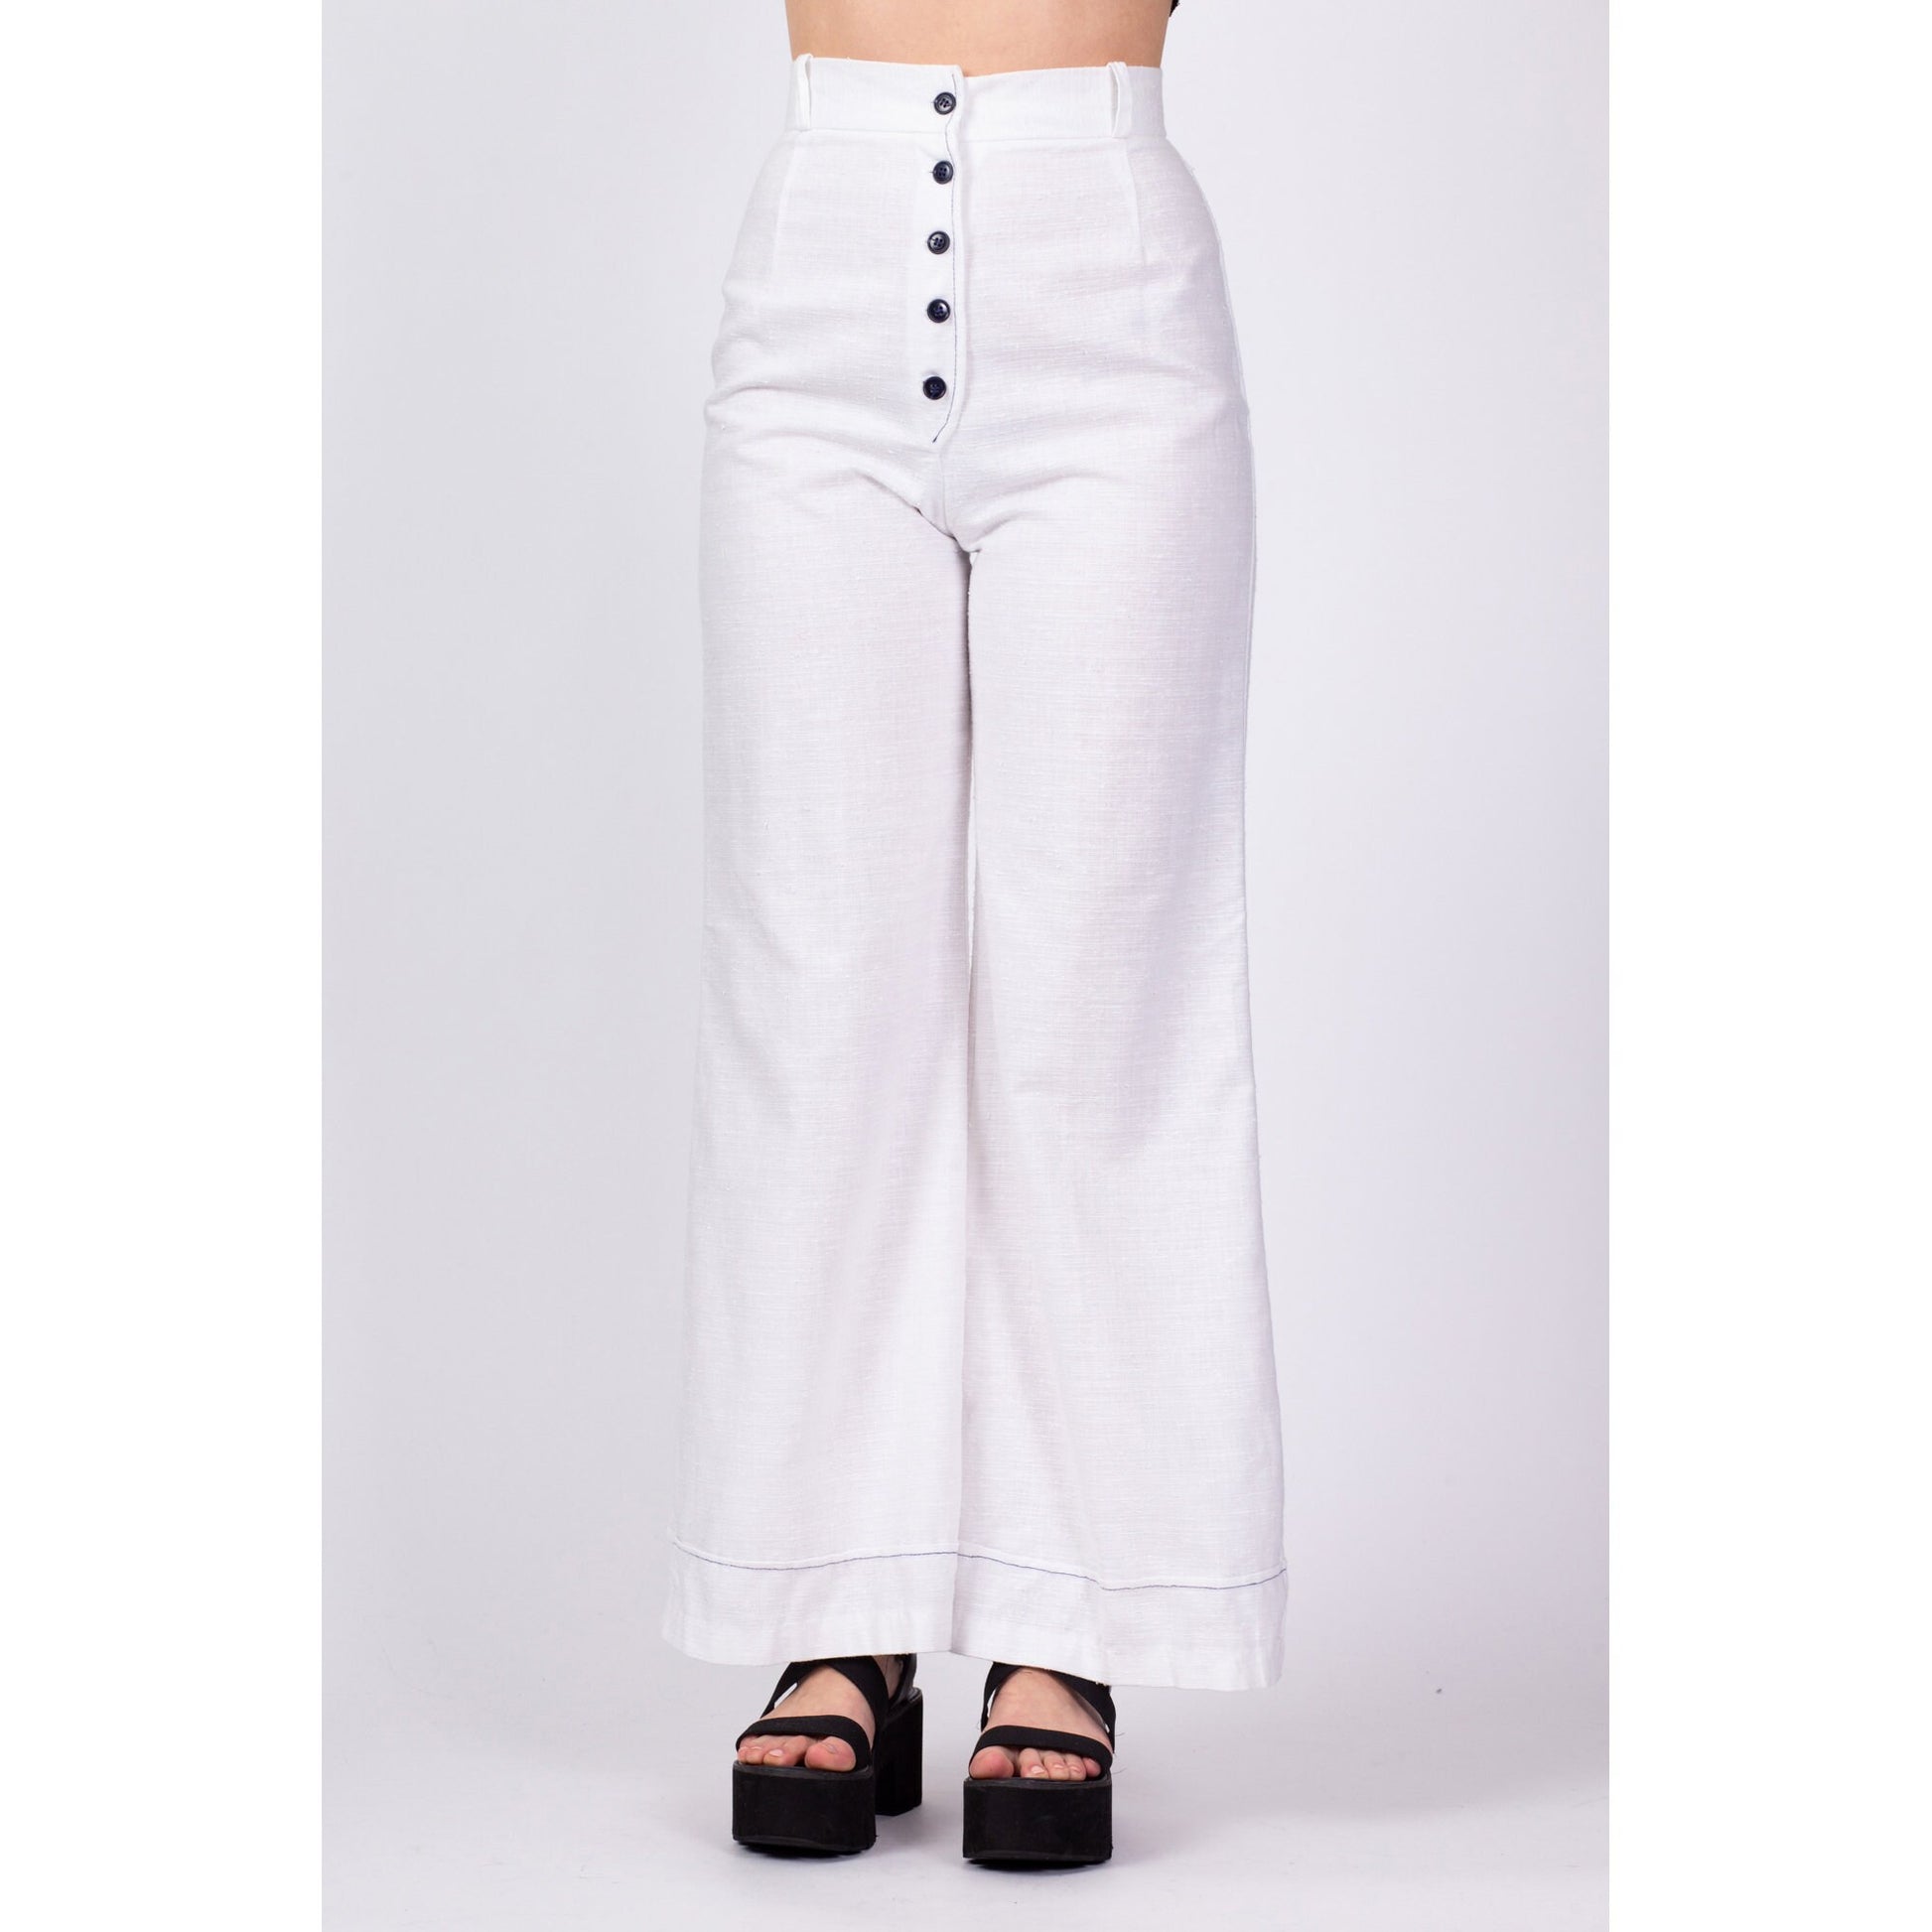 70s White Button Fly High Waisted Pants - Small, 25.5" 